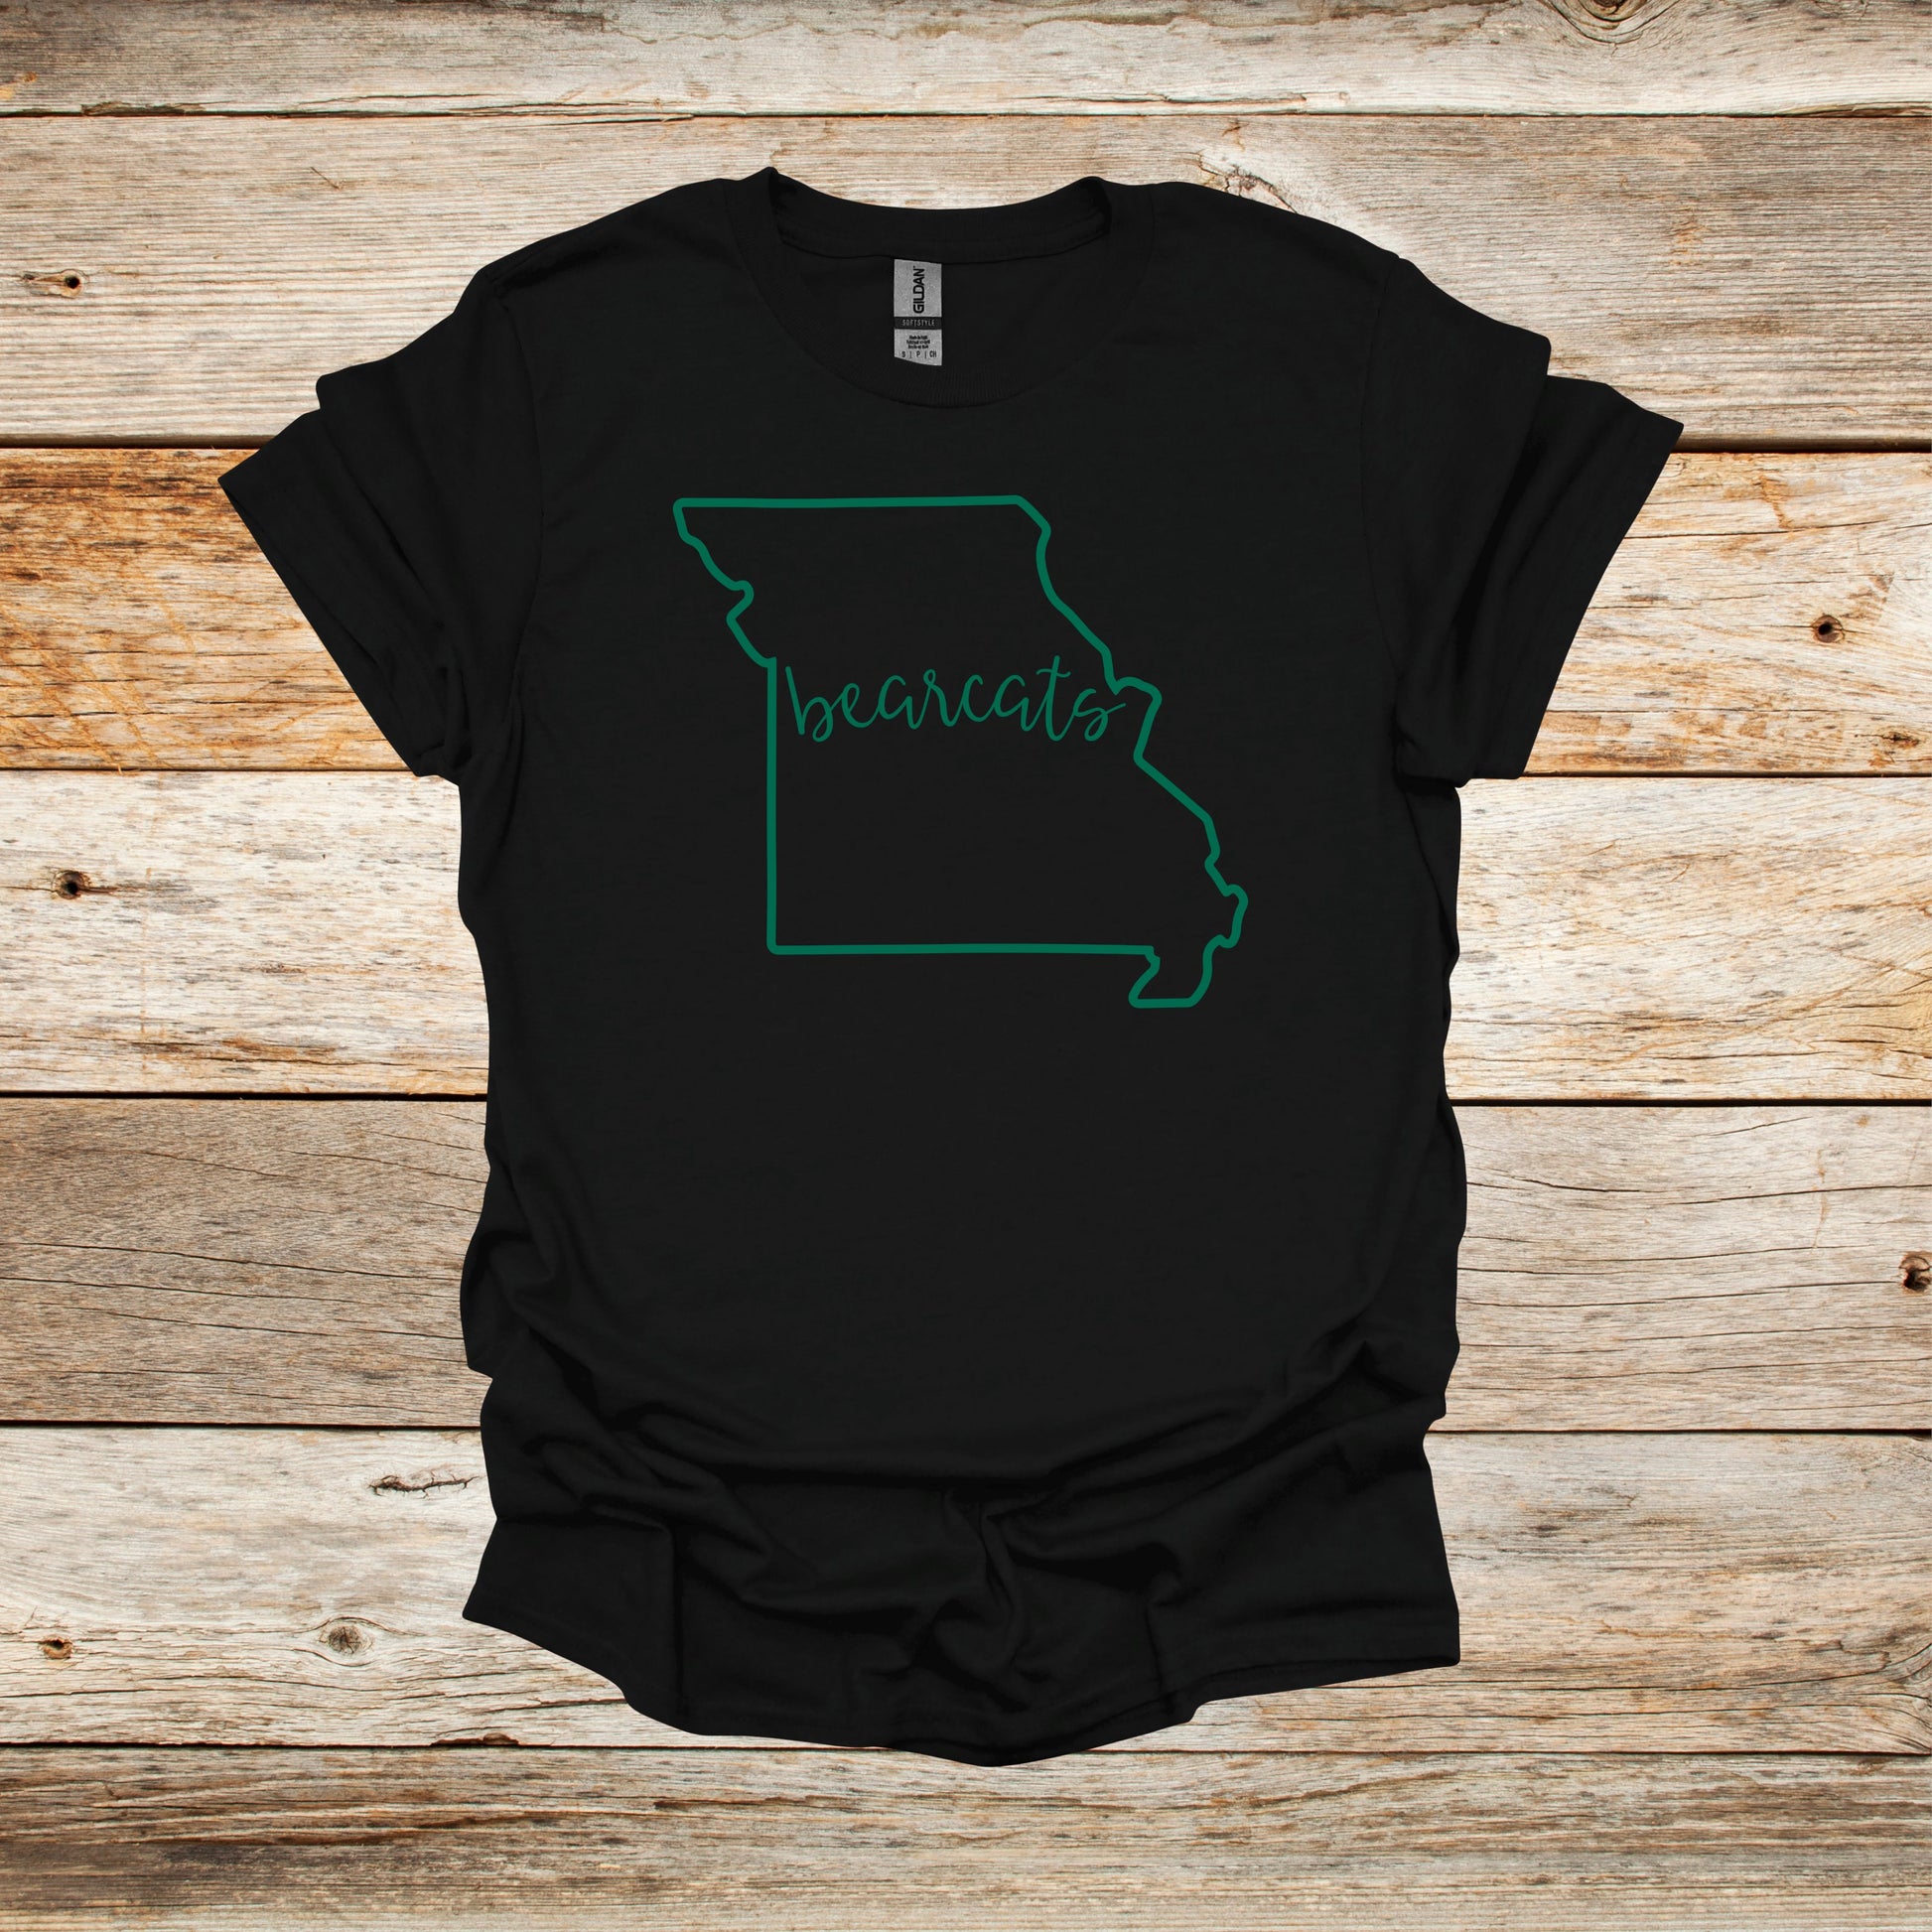 College T Shirt - Northwest Missouri State University Bearcats - State Outline - Adult and Children's Tee Shirts T-Shirts Graphic Avenue Black Adult Small 